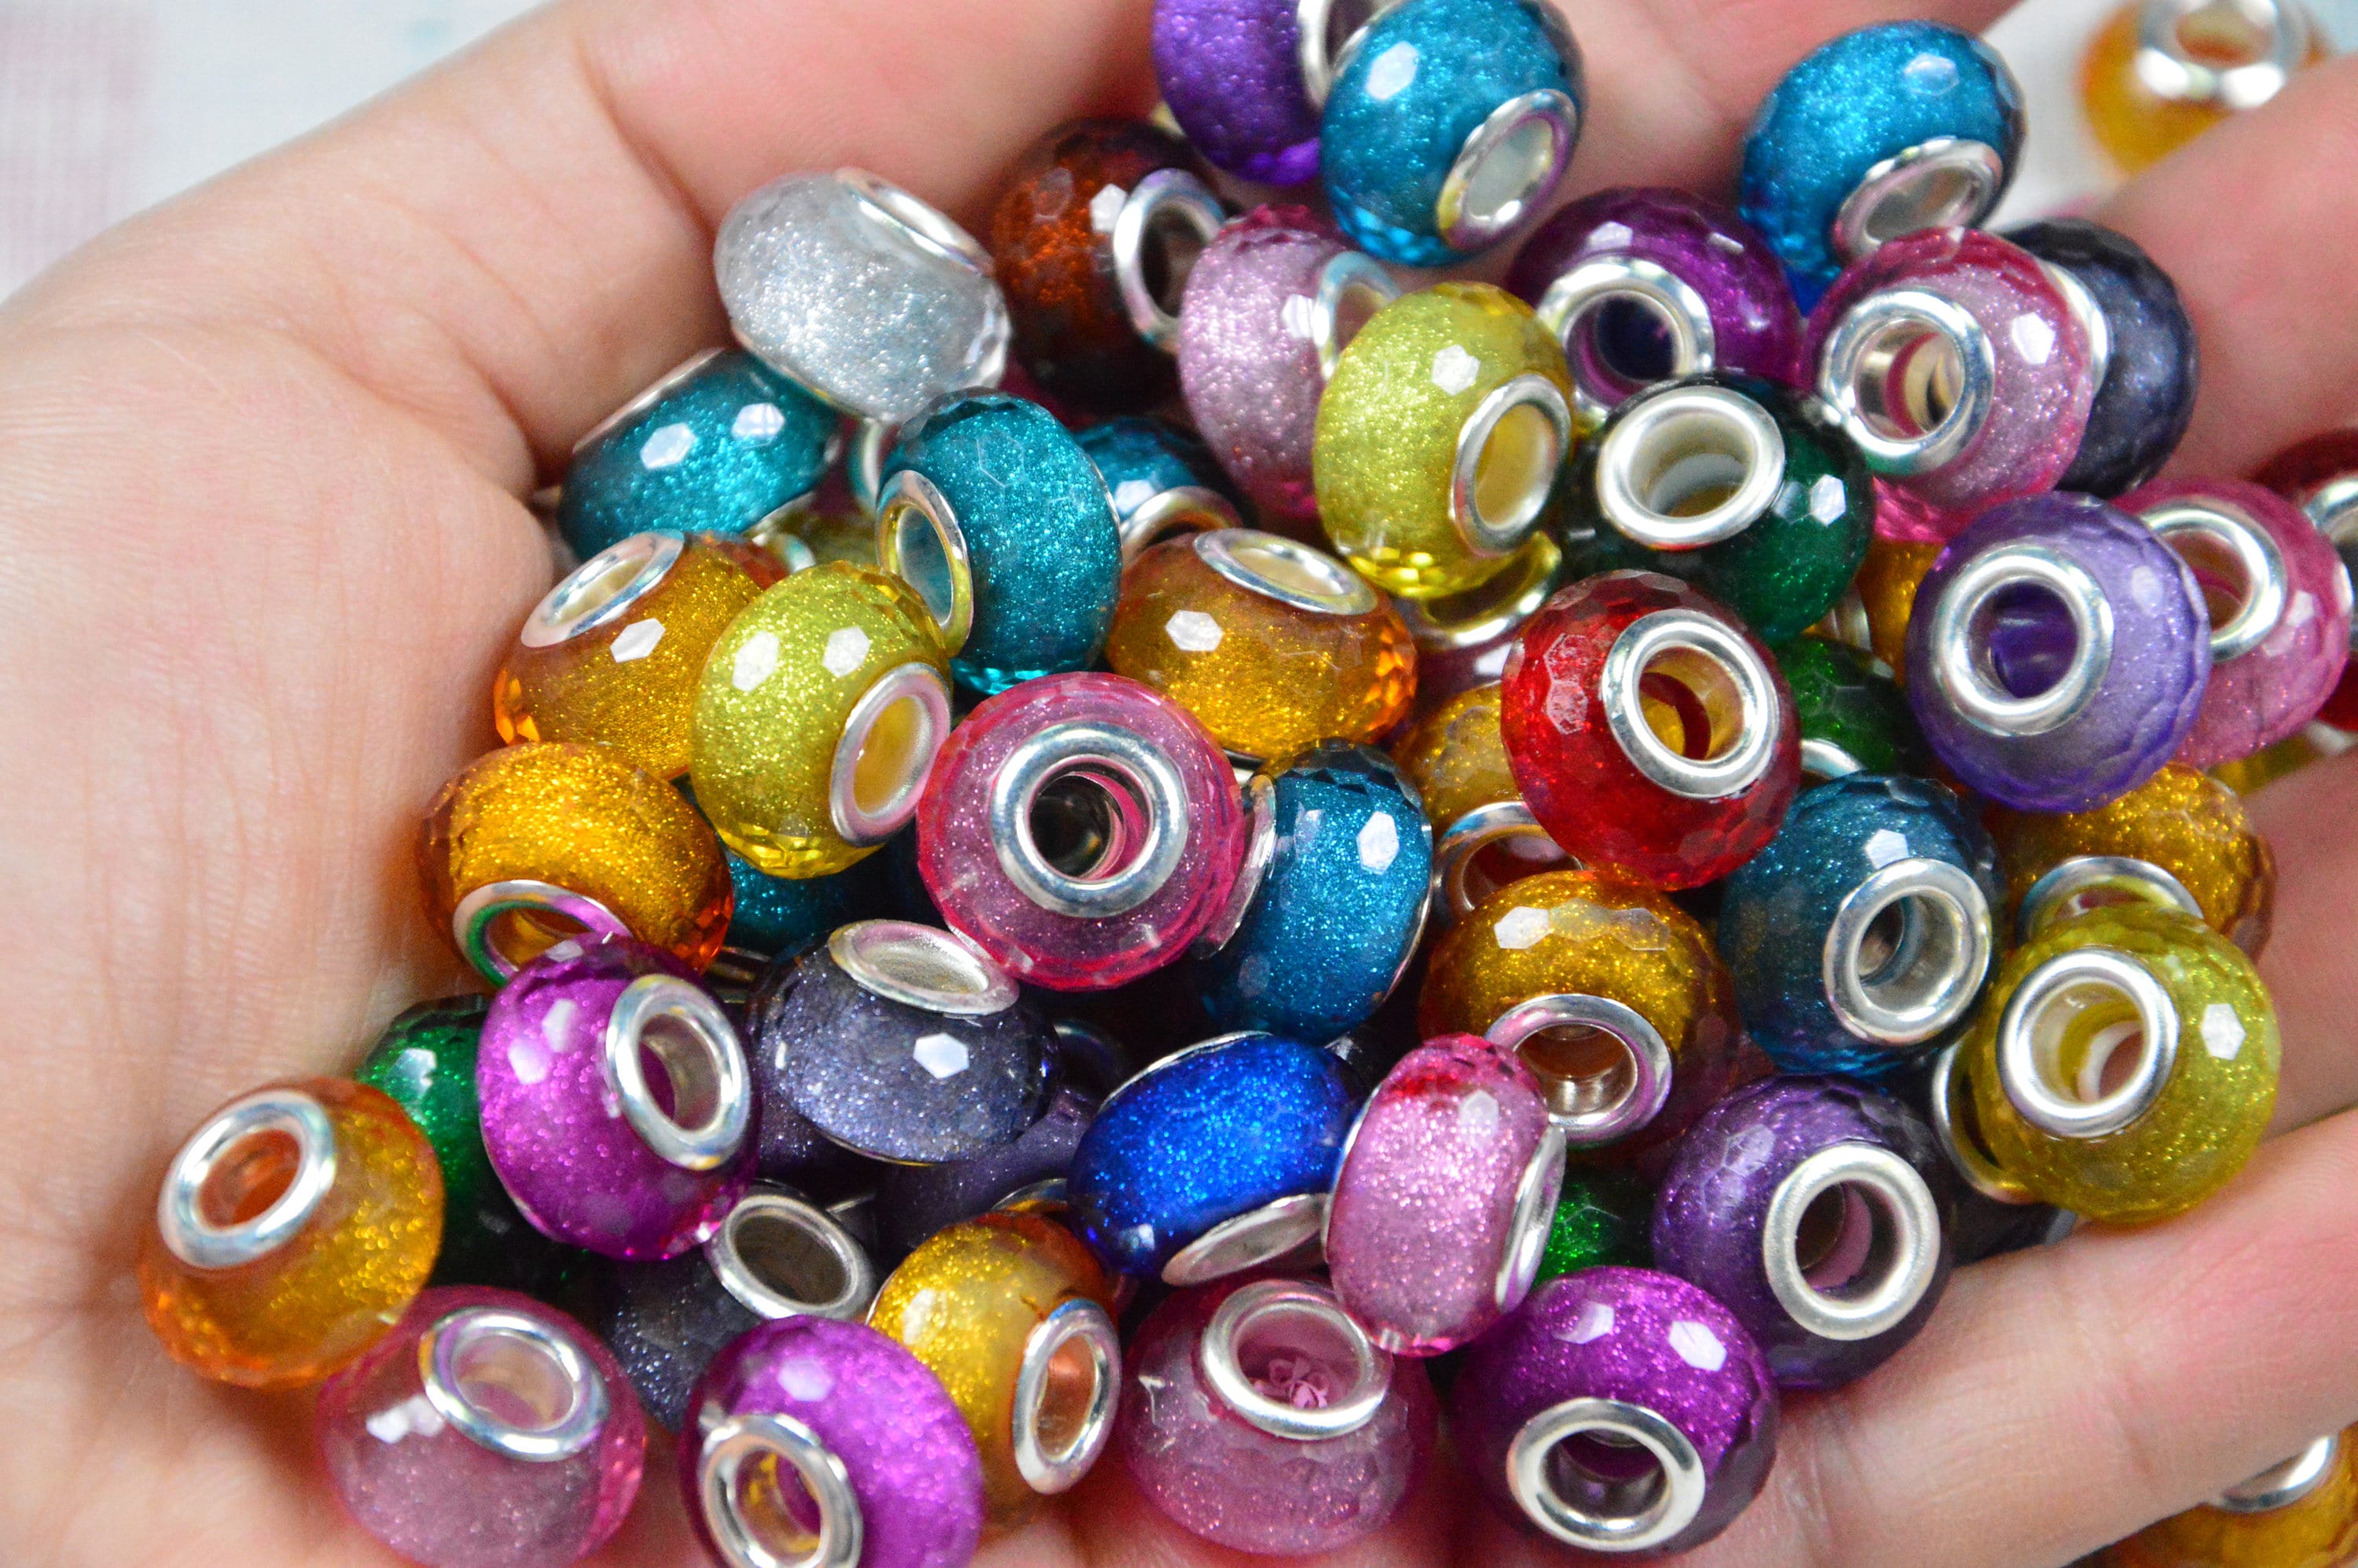 200 Pack of Hole Glass Beads for Jewelry Making,European Beads Bulk Mixed Color Beads for DIY Craft, Other